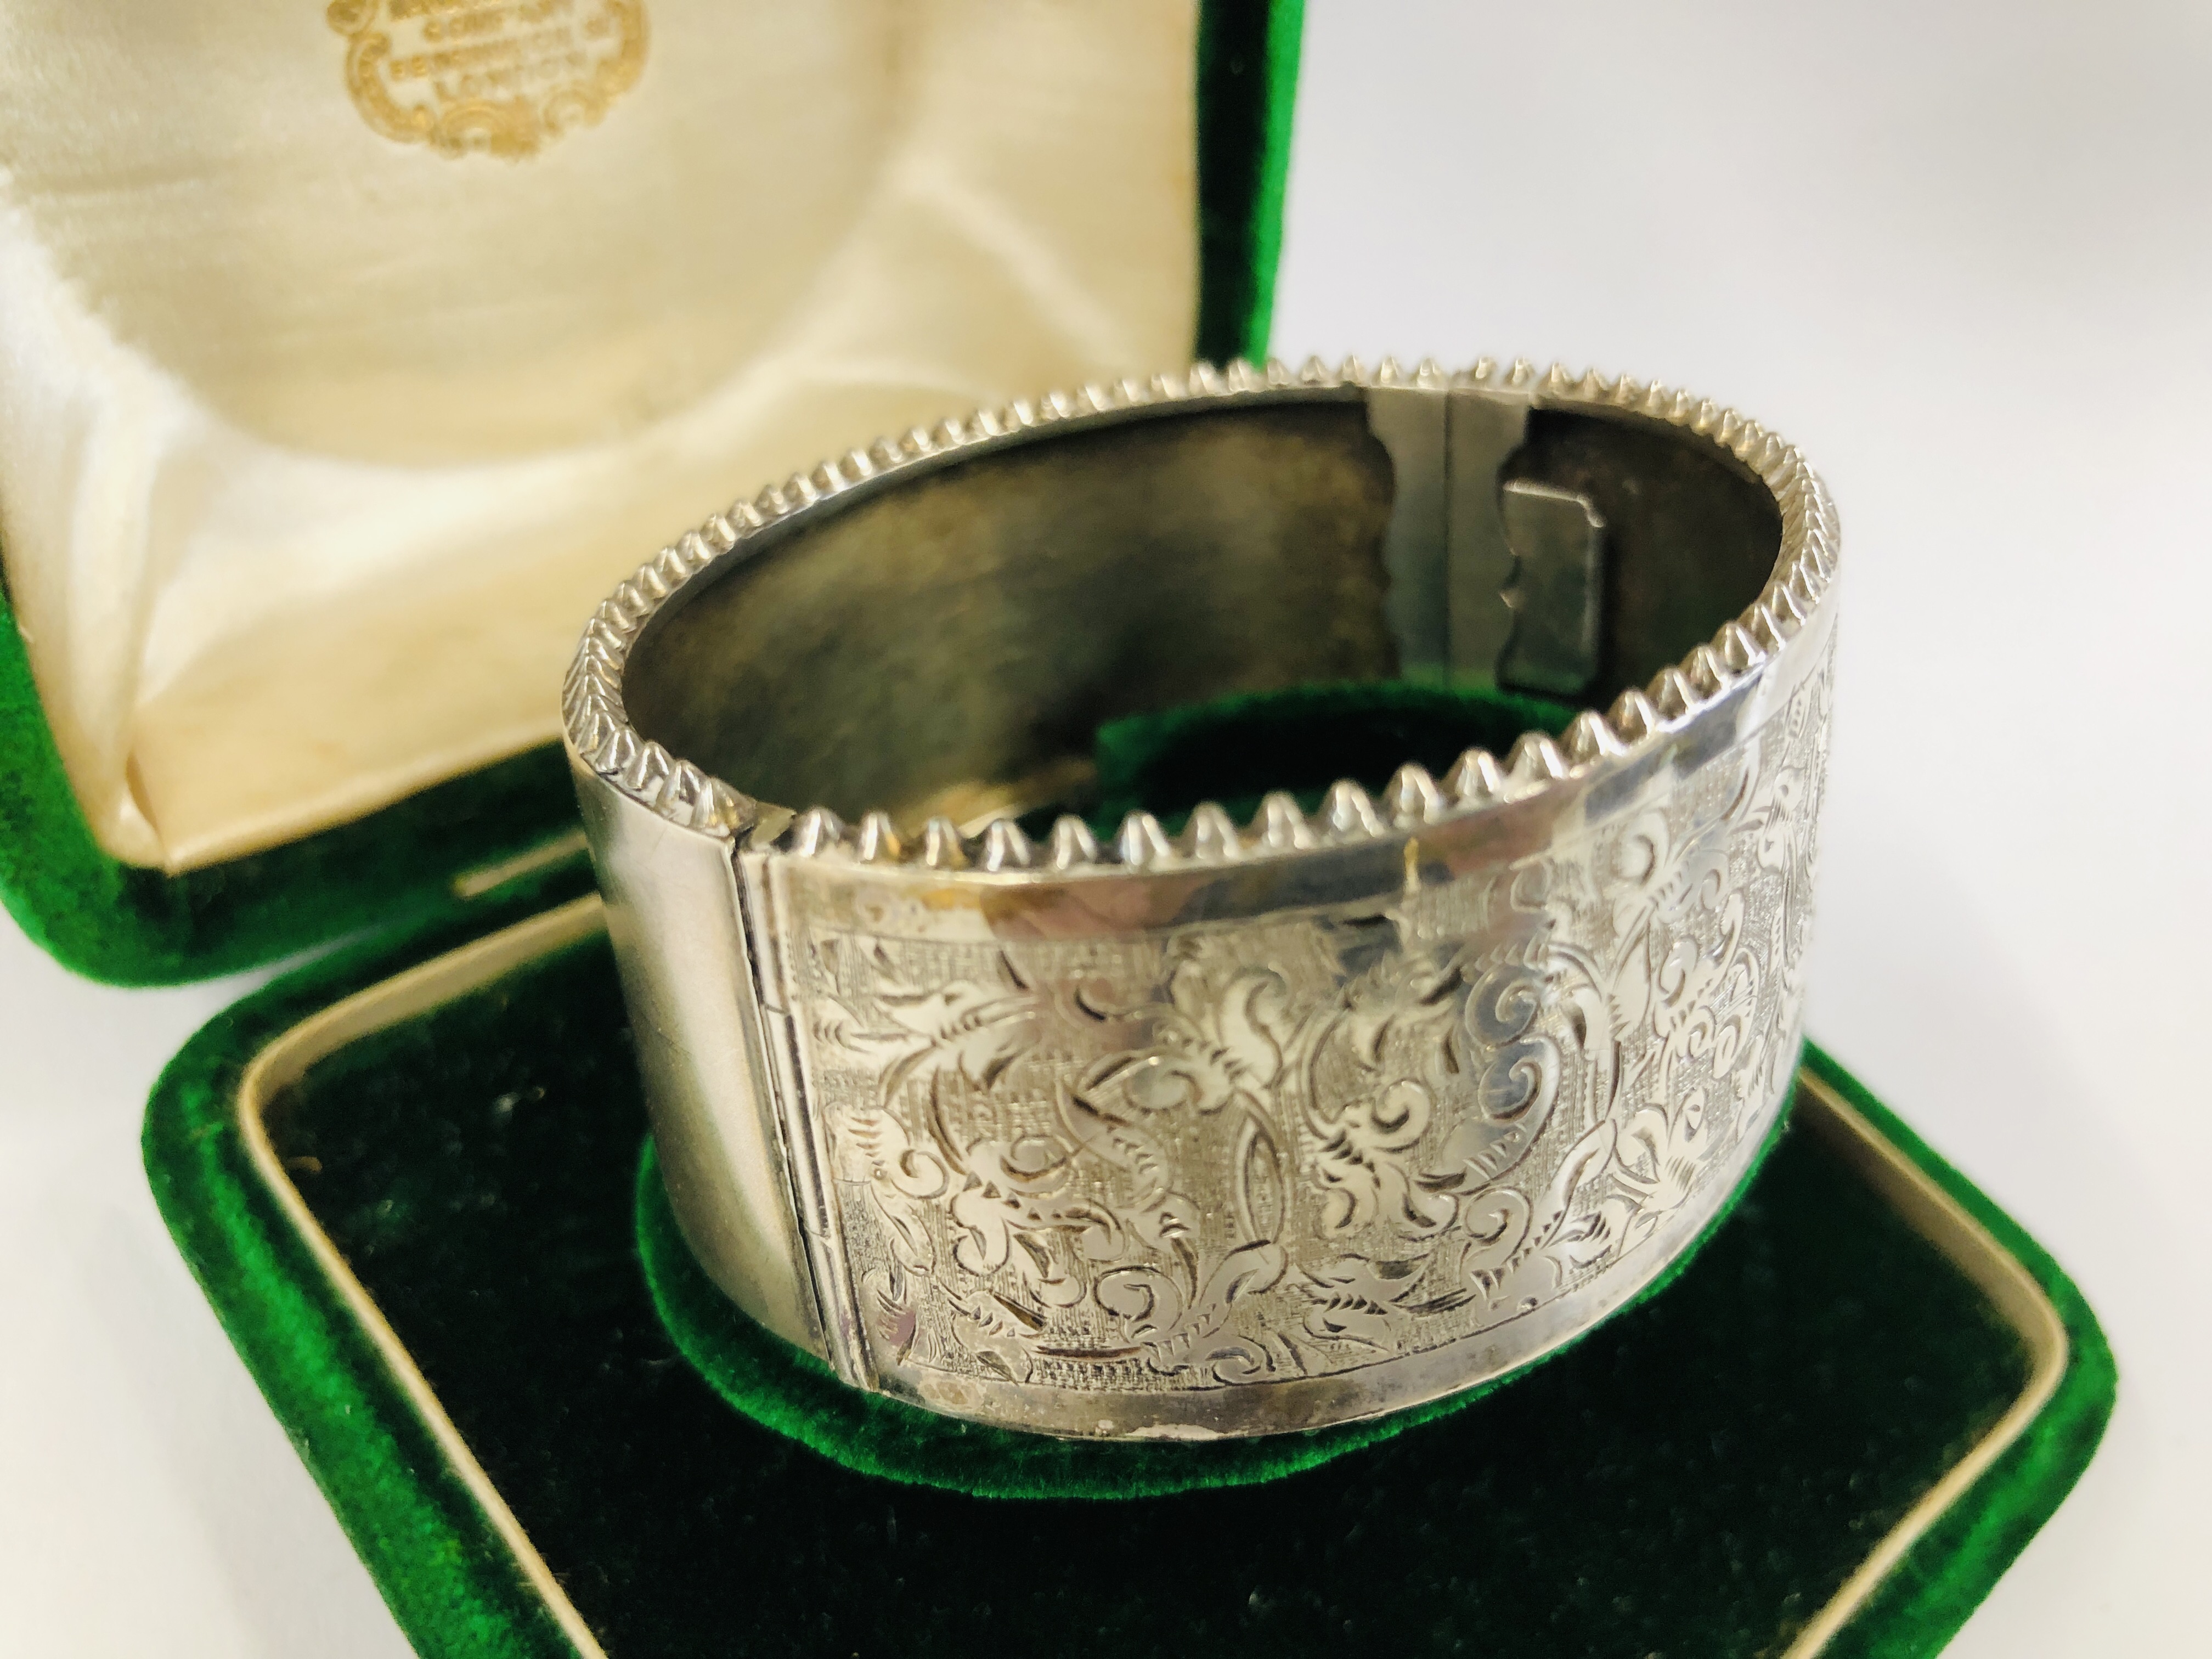 A VINTAGE WHITE METAL ENGRAVED HINGED BANGLE IN AN ANTIQUE GREEN VELVET BOX MARKED "THE ALEX CLARK" - Image 3 of 11